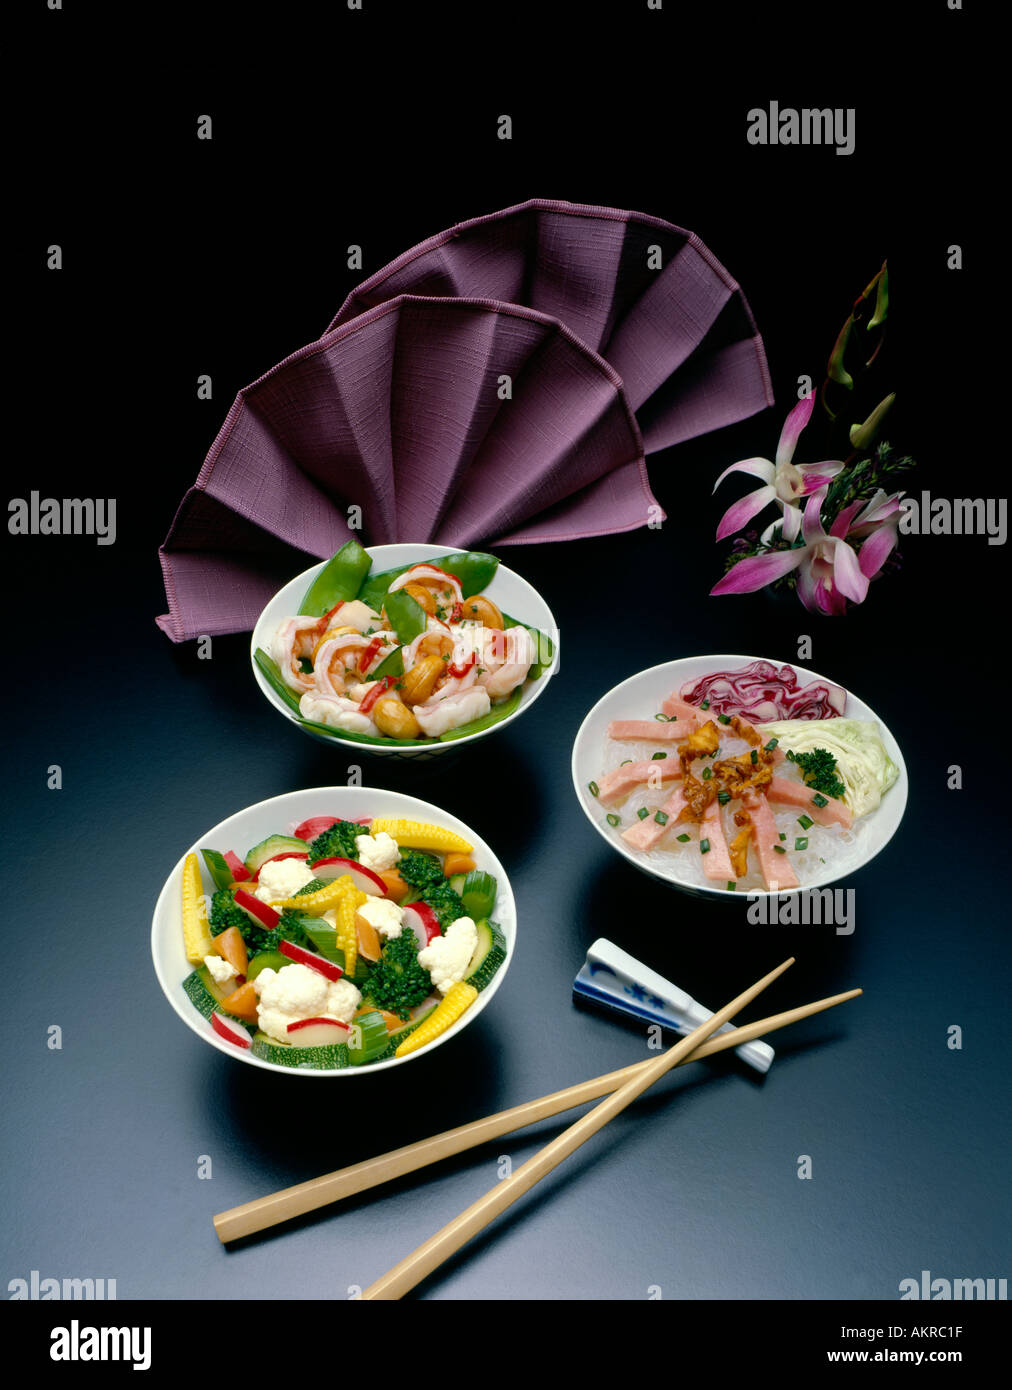 food photography of Japanese Chinese far eastern cuisine 3 plates with  napkin fan chop sticks Stock Photo - Alamy